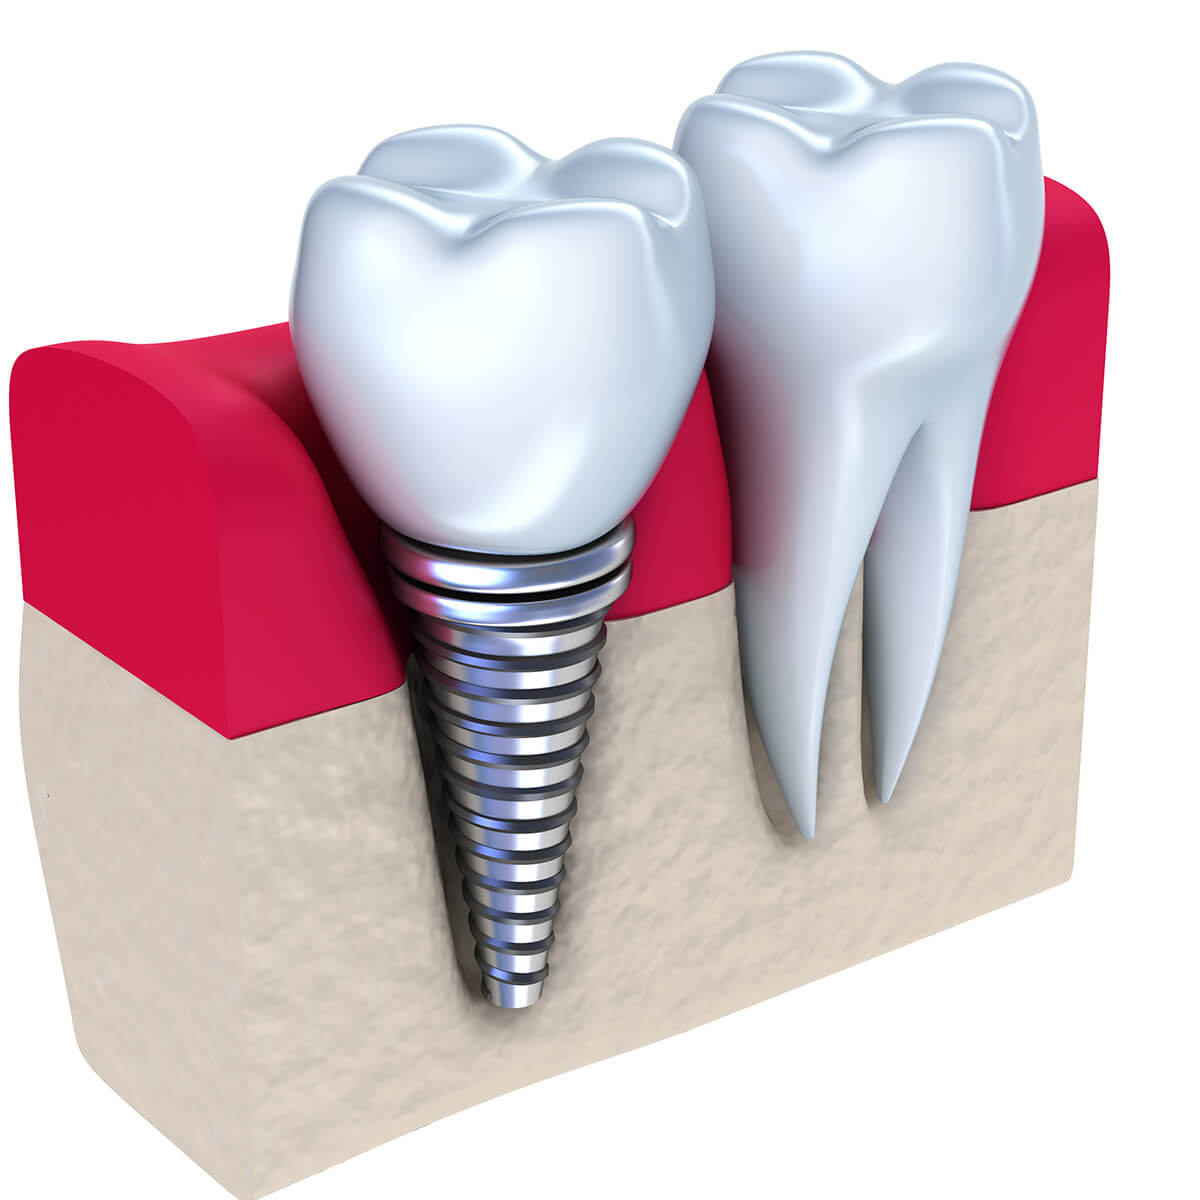 Cost of Dental Implants in Knoxville Area